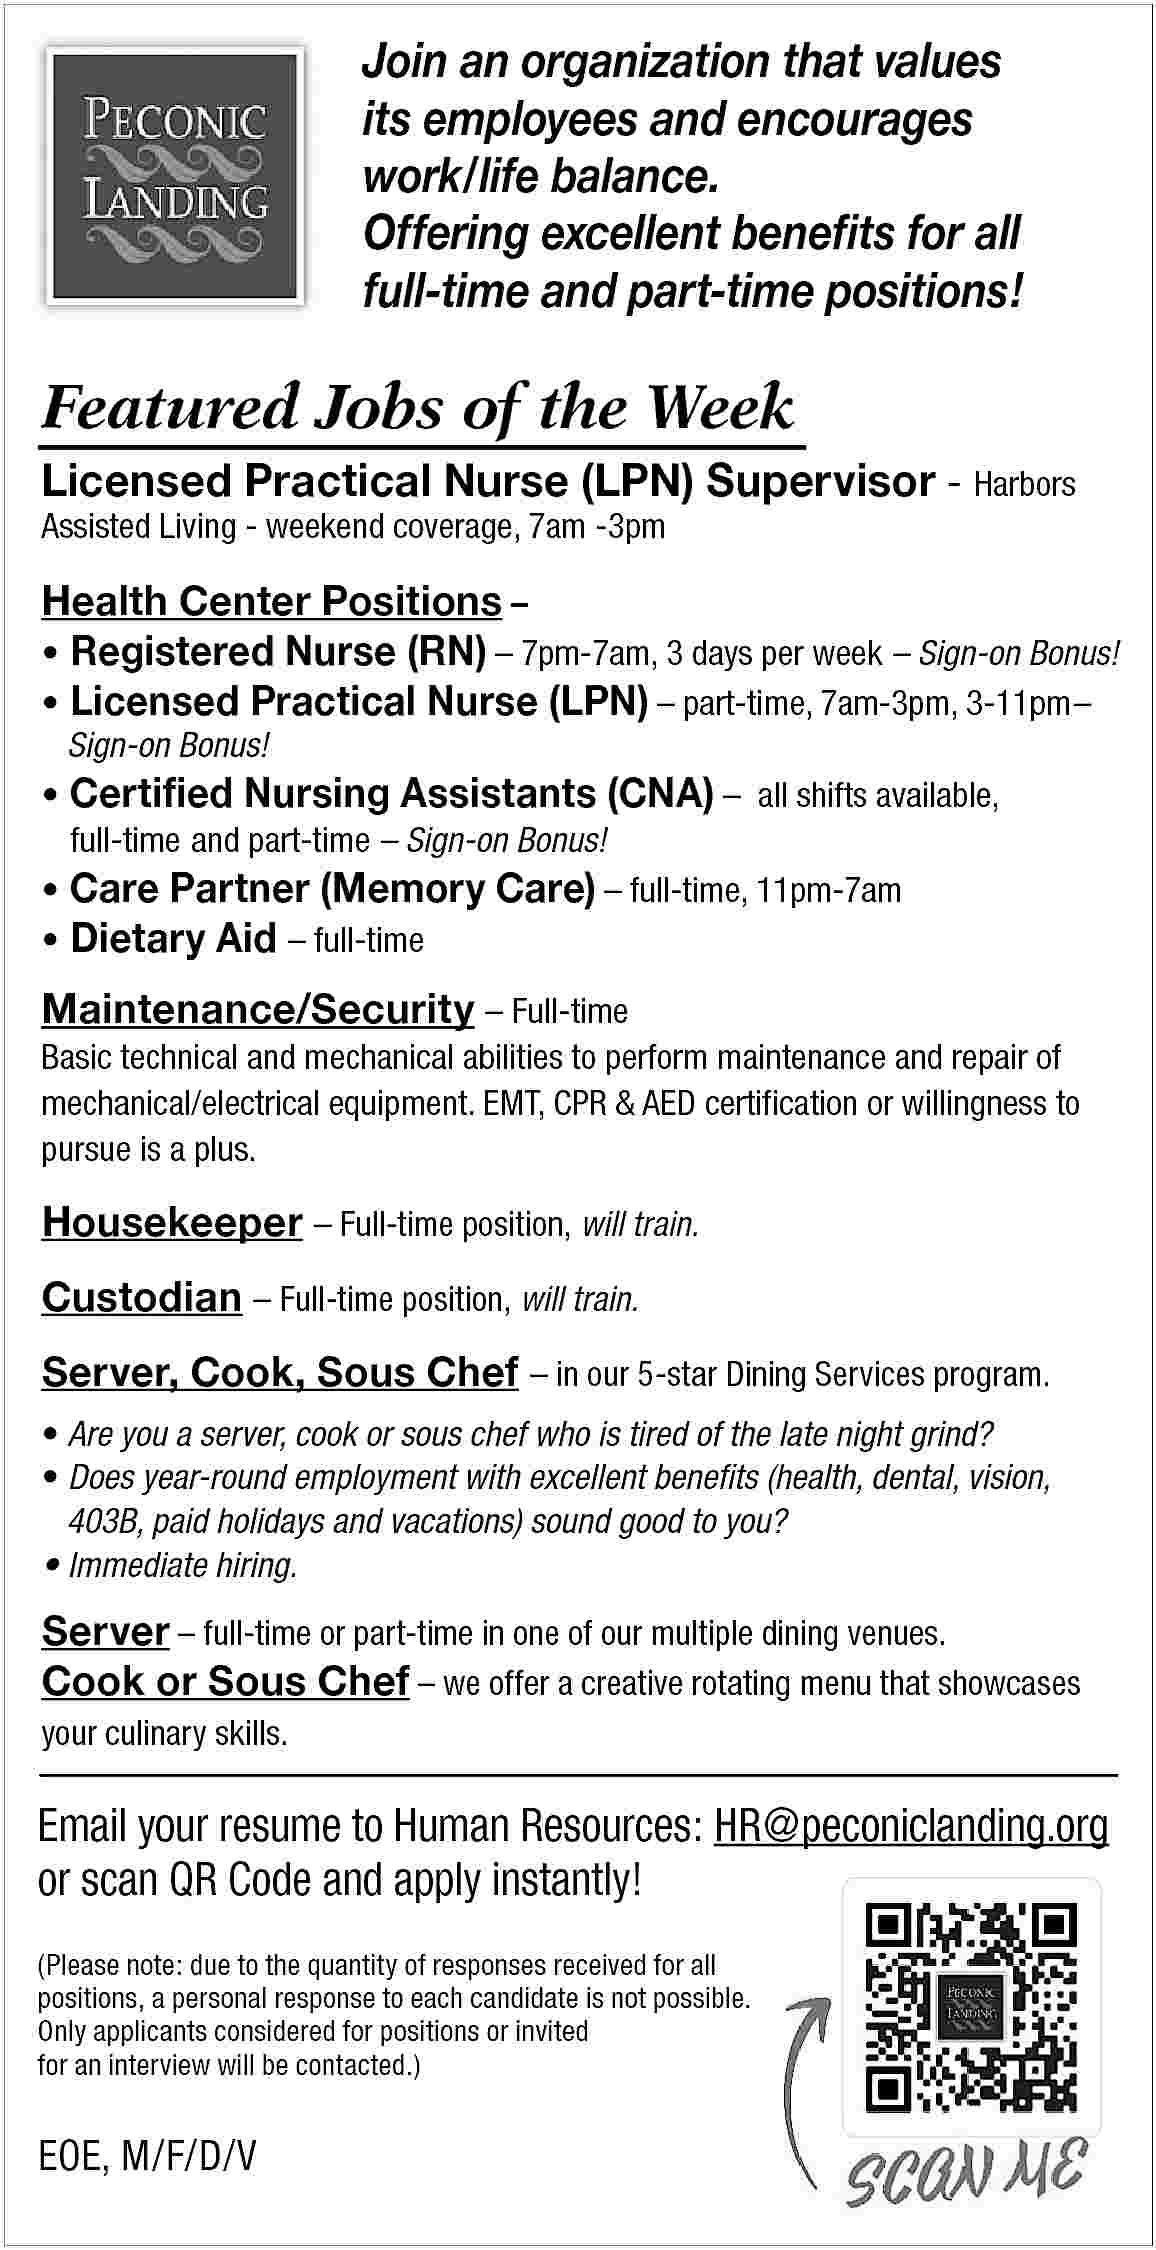 Join an organization that values  Join an organization that values  its employees and encourages  work/life balance.  Offering excellent benefits for all  full-time and part-time positions!    Featured Jobs of the Week  Licensed Practical Nurse (LPN) Supervisor - Harbors    Assisted Living - weekend coverage, 7am -3pm    Health Center Positions          Registered Nurse (RN)     7pm-7am, 3 days per week     Sign-on Bonus!      Licensed Practical Nurse (LPN)     part-time, 7am-3pm, 3-11pm     Sign-on Bonus!         	              Certified Nursing Assistants (CNA)     all shifts available,  full-time 	and part-time     Sign-on Bonus!    Care Partner (Memory Care)     full-time, 11pm-7am  Dietary Aid     full-time    Maintenance/Security     Full-time  Basic technical and mechanical abilities to perform maintenance and repair of  mechanical/electrical equipment. EMT, CPR & AED certification or willingness to  pursue is a plus.  Housekeeper     Full-time position, will train.  Custodian     Full-time position, will train.  Server, Cook, Sous Chef     in our 5-star Dining Services program.      Are you a server, cook or sous chef who is tired of the late night grind?      Does year-round employment with excellent benefits (health, dental, vision,  	 403B, paid holidays and vacations) sound good to you?      Immediate hiring.    Server     full-time or part-time in one of our multiple dining venues.  Cook or Sous Chef     we offer a creative rotating menu that showcases    your culinary skills.    Email your resume to Human Resources: HR@peconiclanding.org  or scan QR Code and apply instantly!  (Please note: due to the quantity of responses received for all  positions, a personal response to each candidate is not possible.  Only applicants considered for positions or invited  for an interview will be contacted.)    EOE, M/F/D/V     